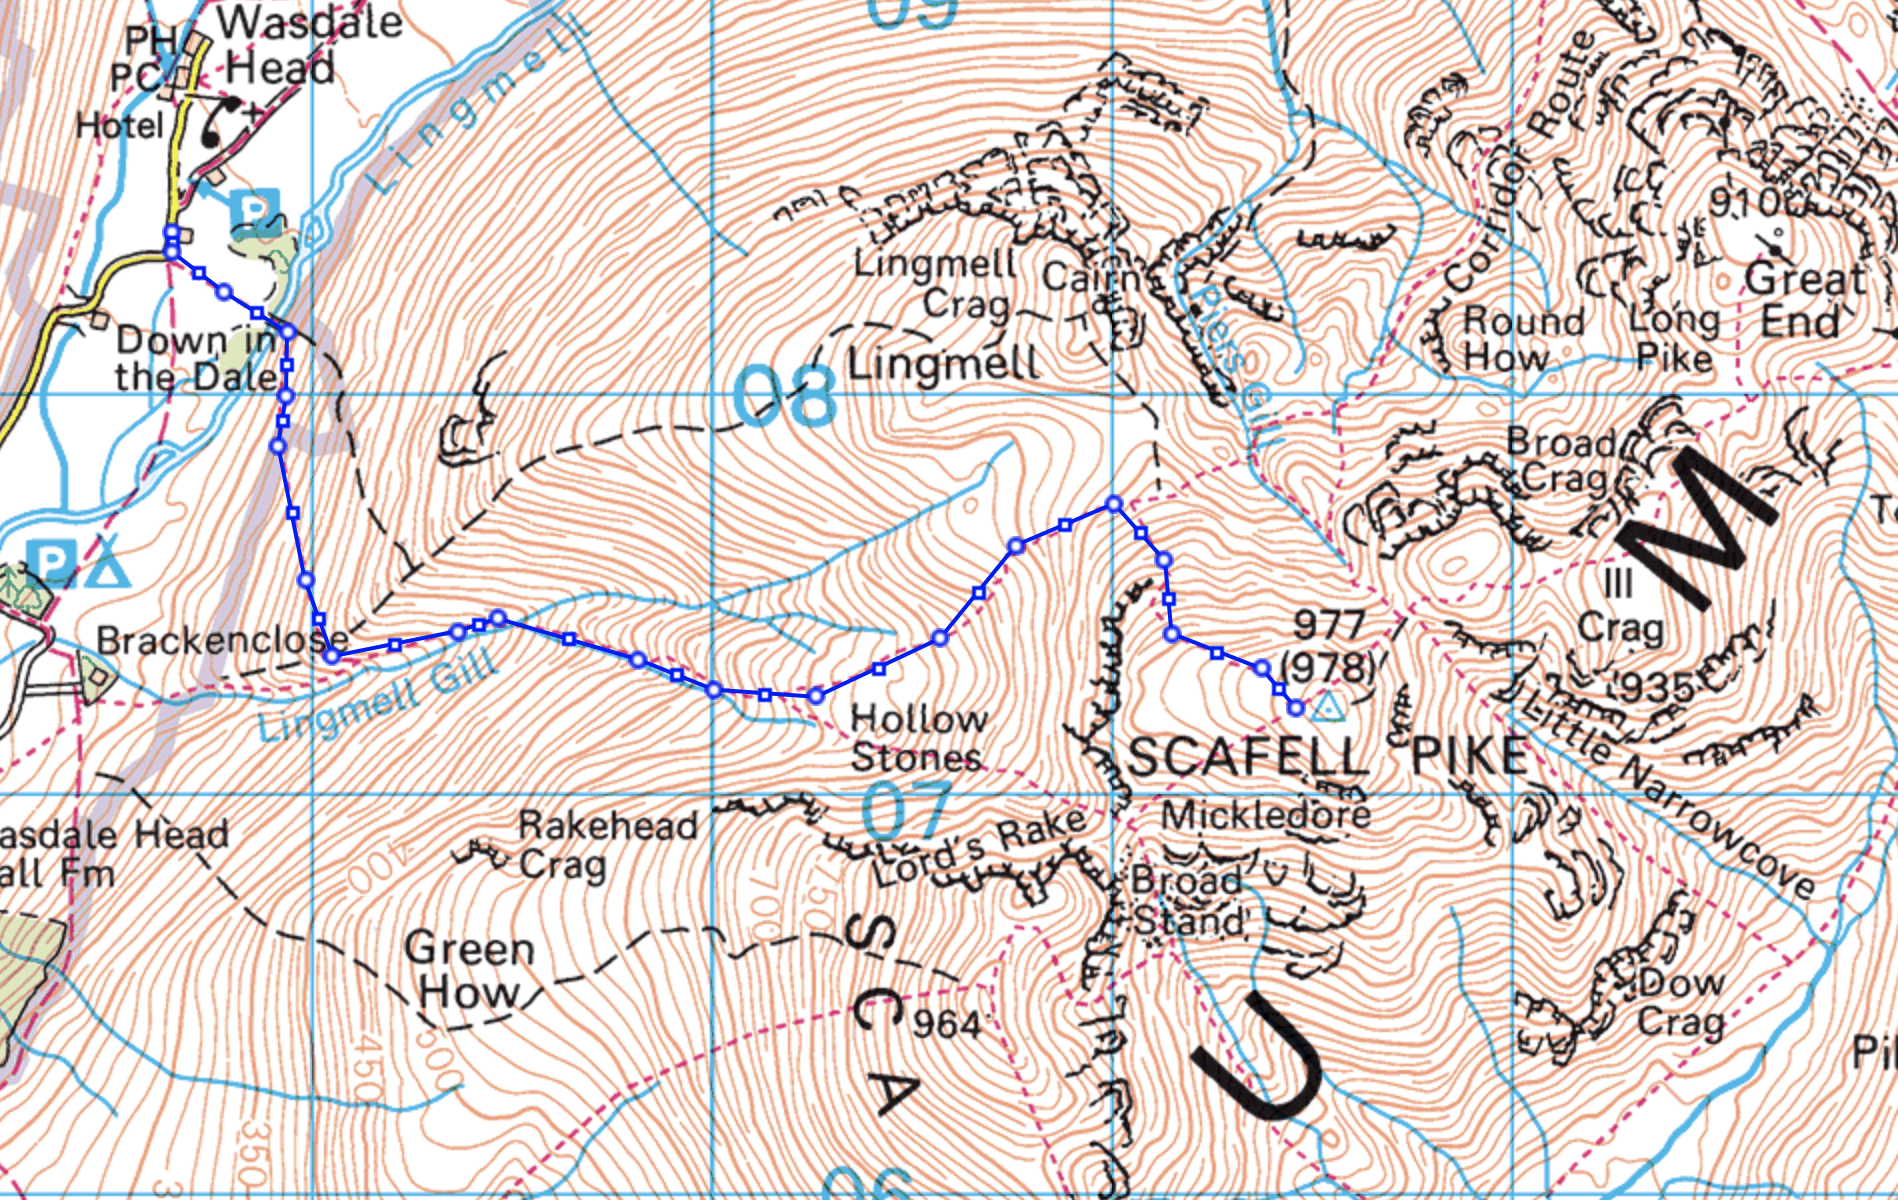 Ordnance survey map showing Scafell Pike Walking Route